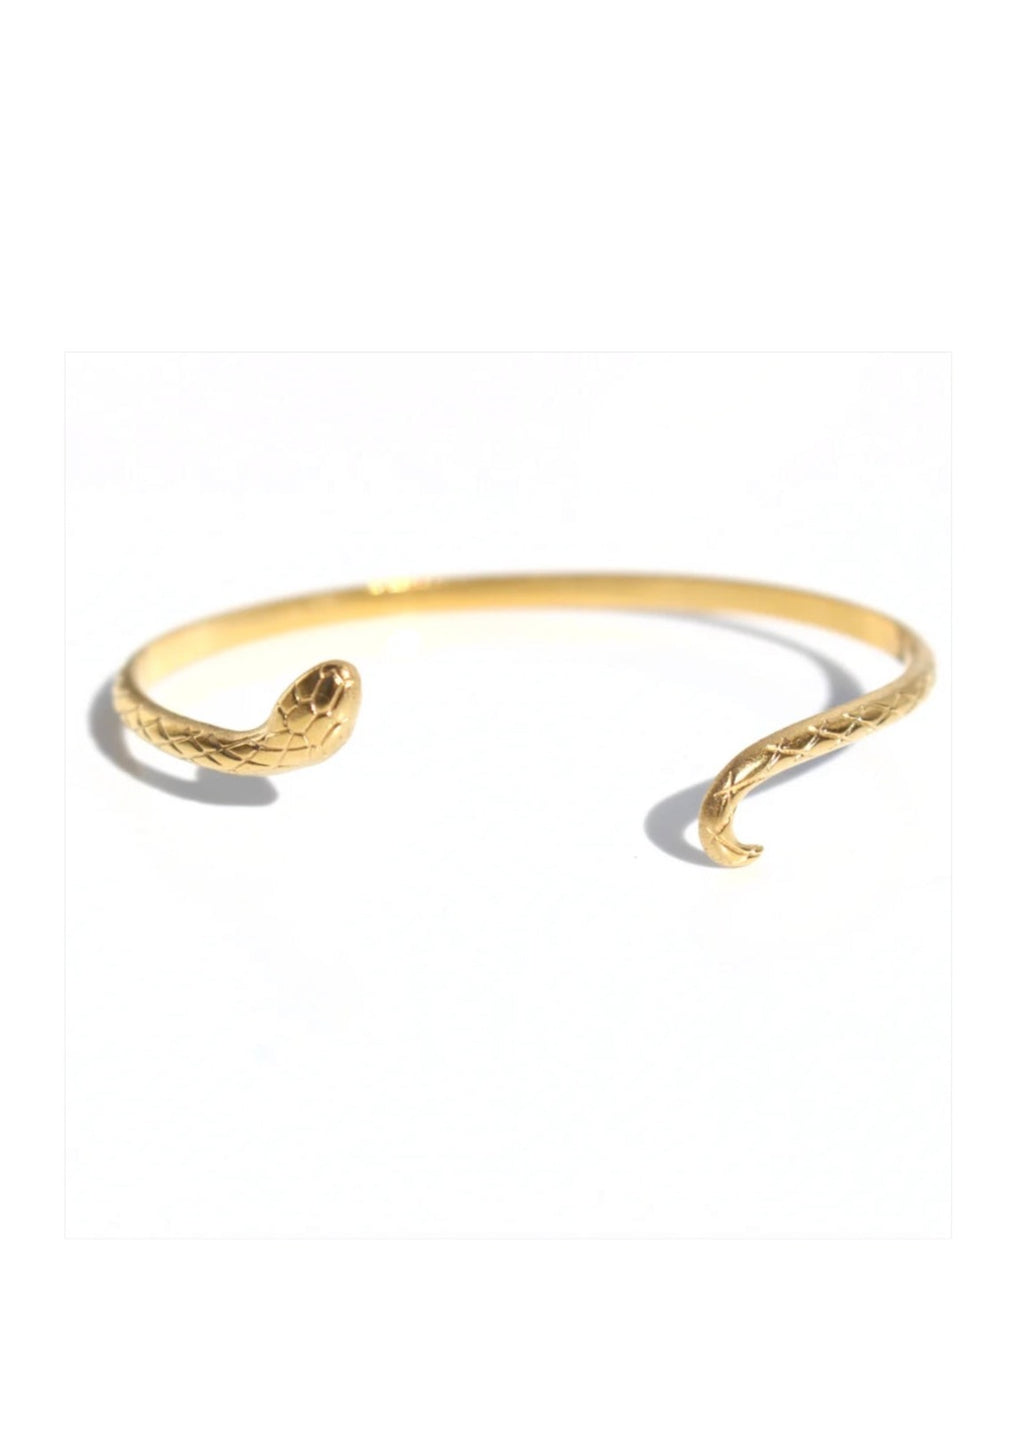 Petite Snake Cuff - Gold, by Queen of the Foxes Subtle statement jewellery...our Petite Snake Cuff is elegant, classic and perfect with your summer tan and current bracelet stacks!  DETAILS:  Adjustable  5.5cm diameter   Stainless with Gold Plate